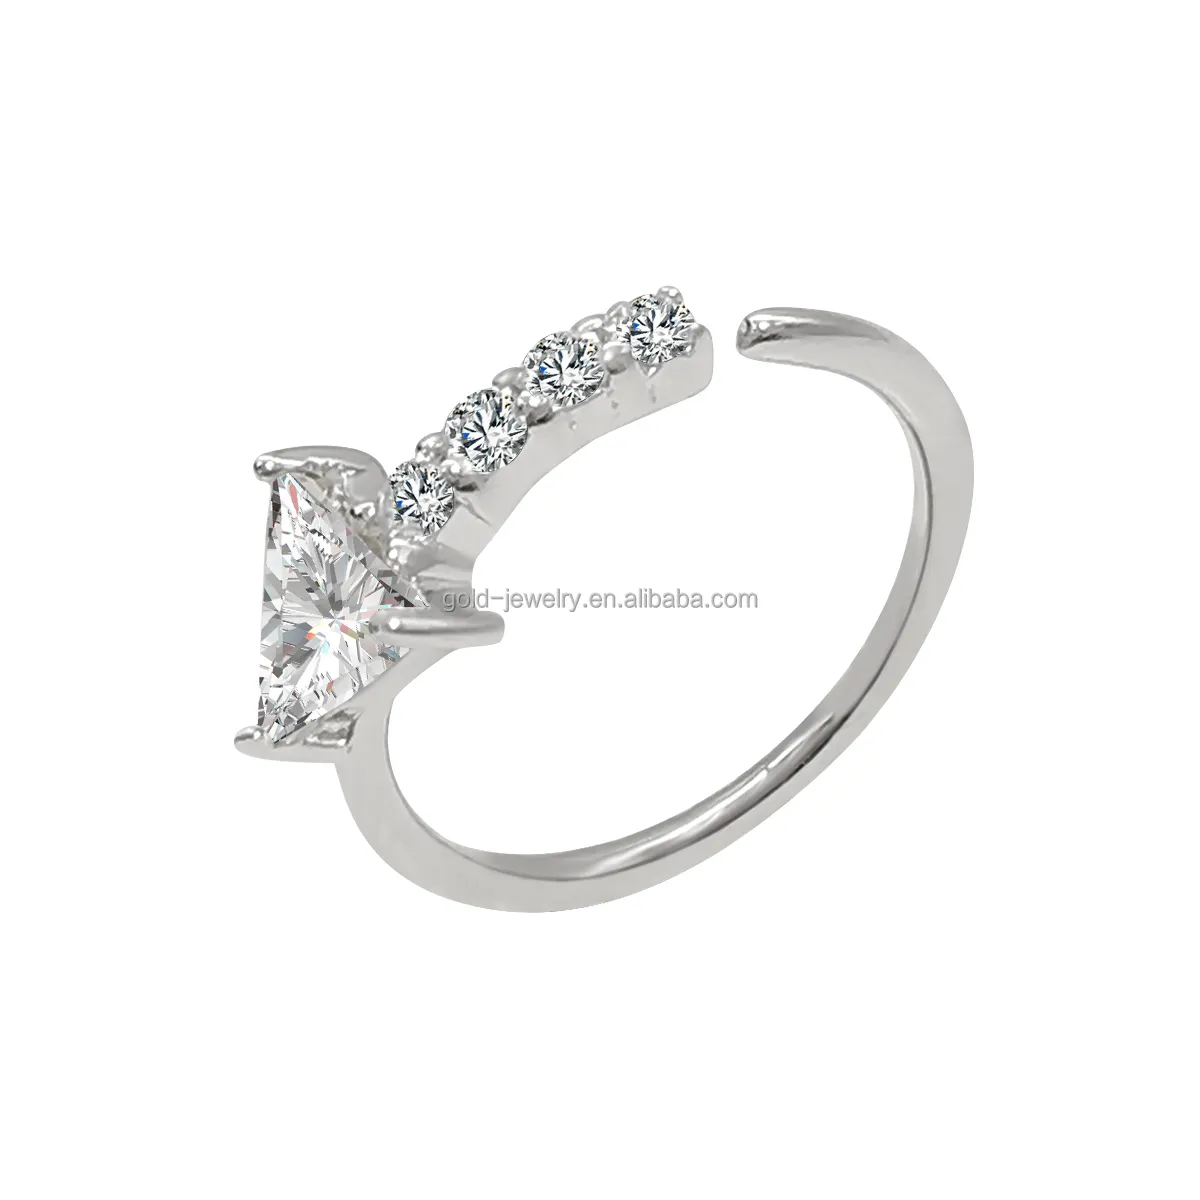 New Trendy AU585 14k Real White Gold Zircon Nose Piercing Jewelry Hoop Nose Ring Body Jewelry